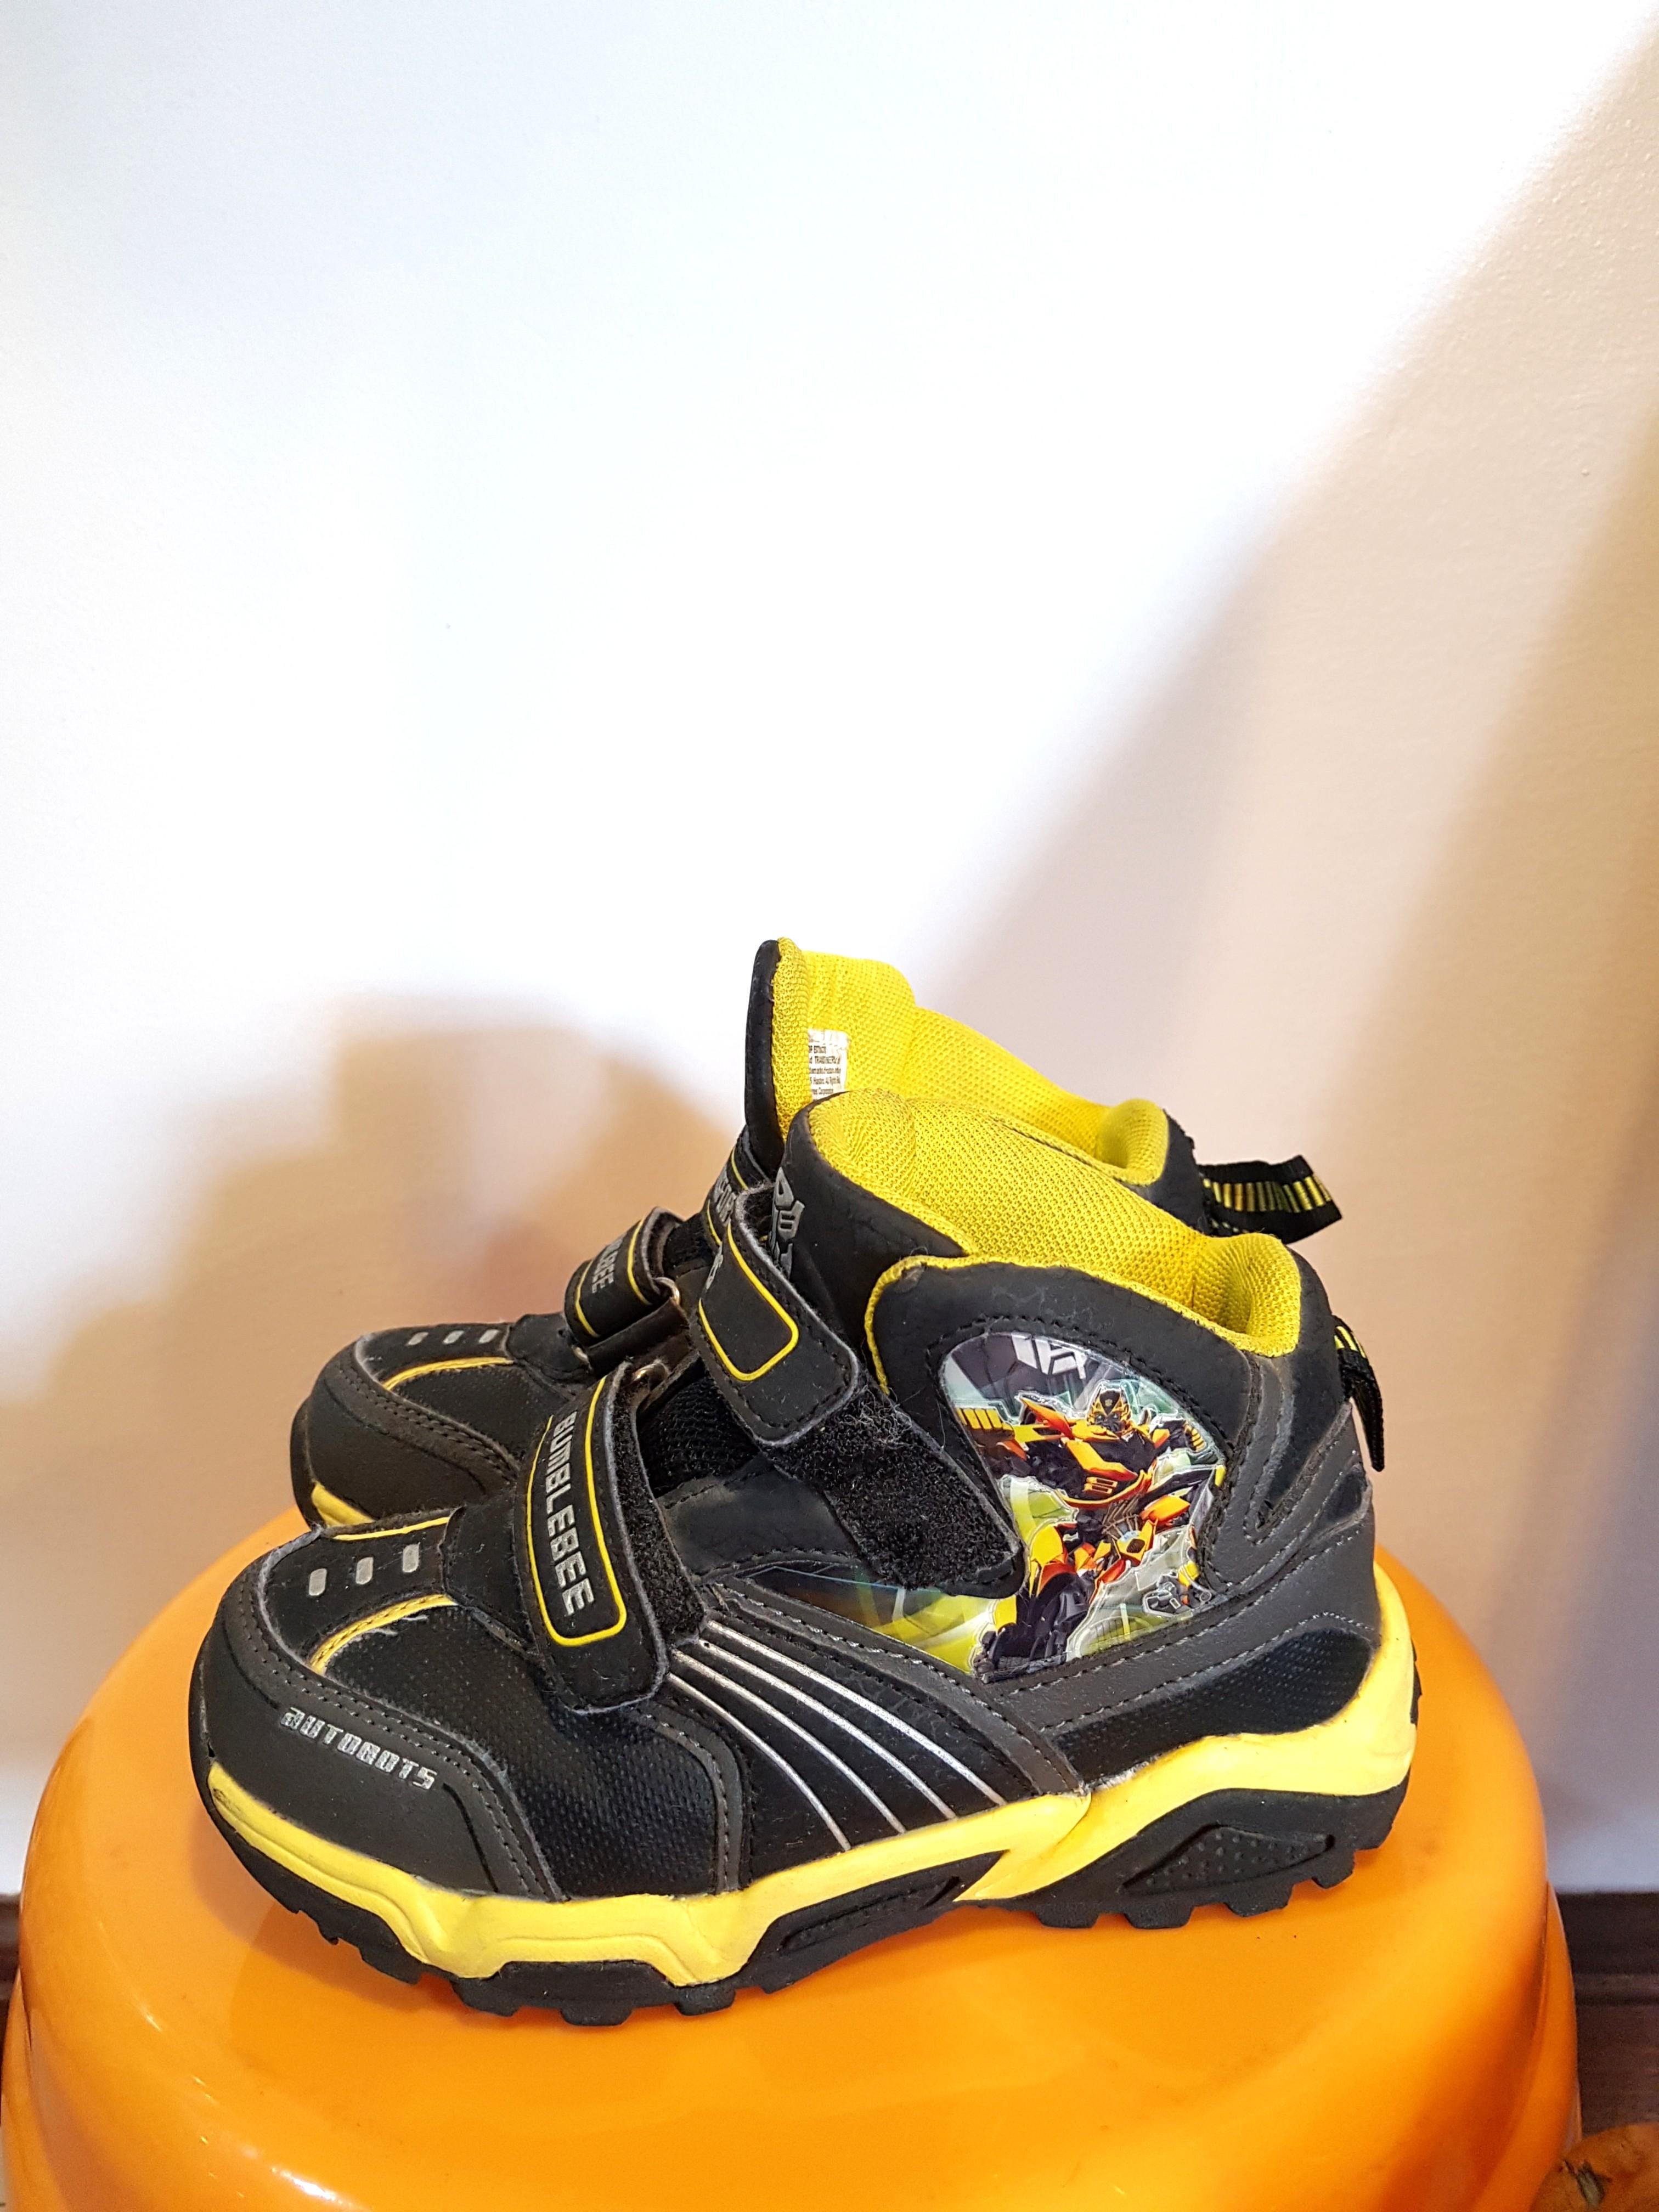 bumblebee light up shoes